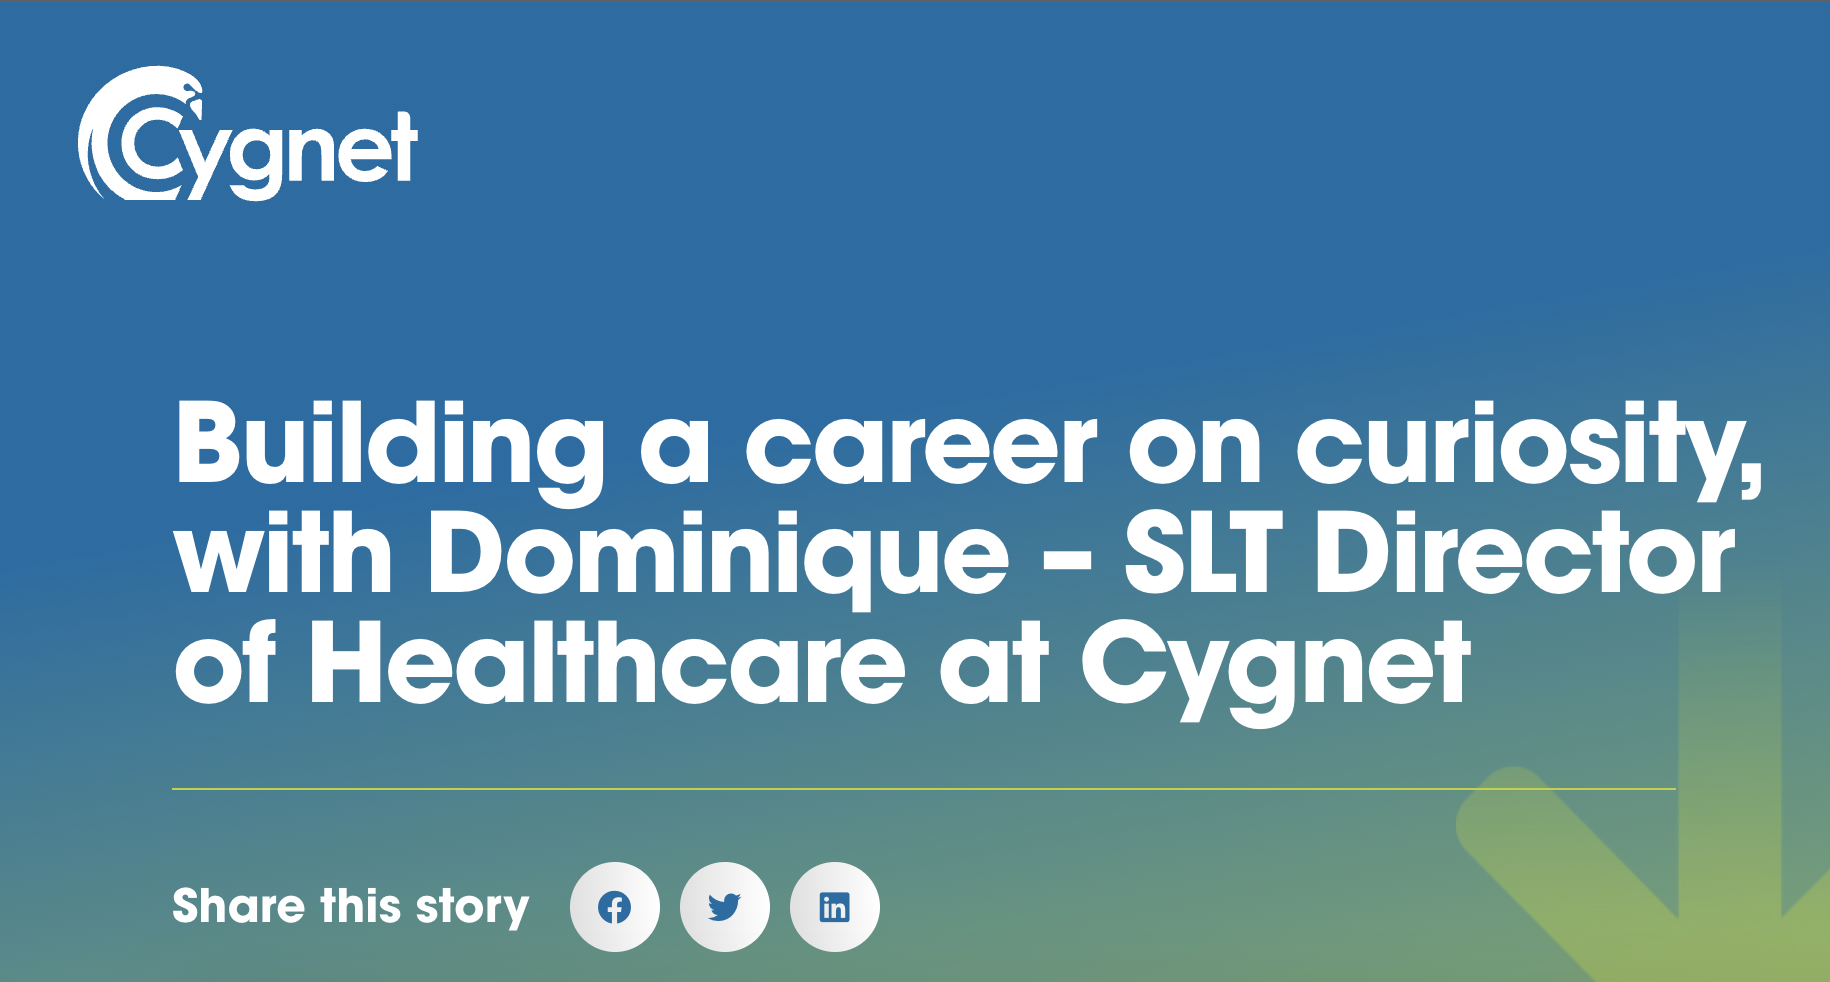 The OT Life with Cygnet Health Care